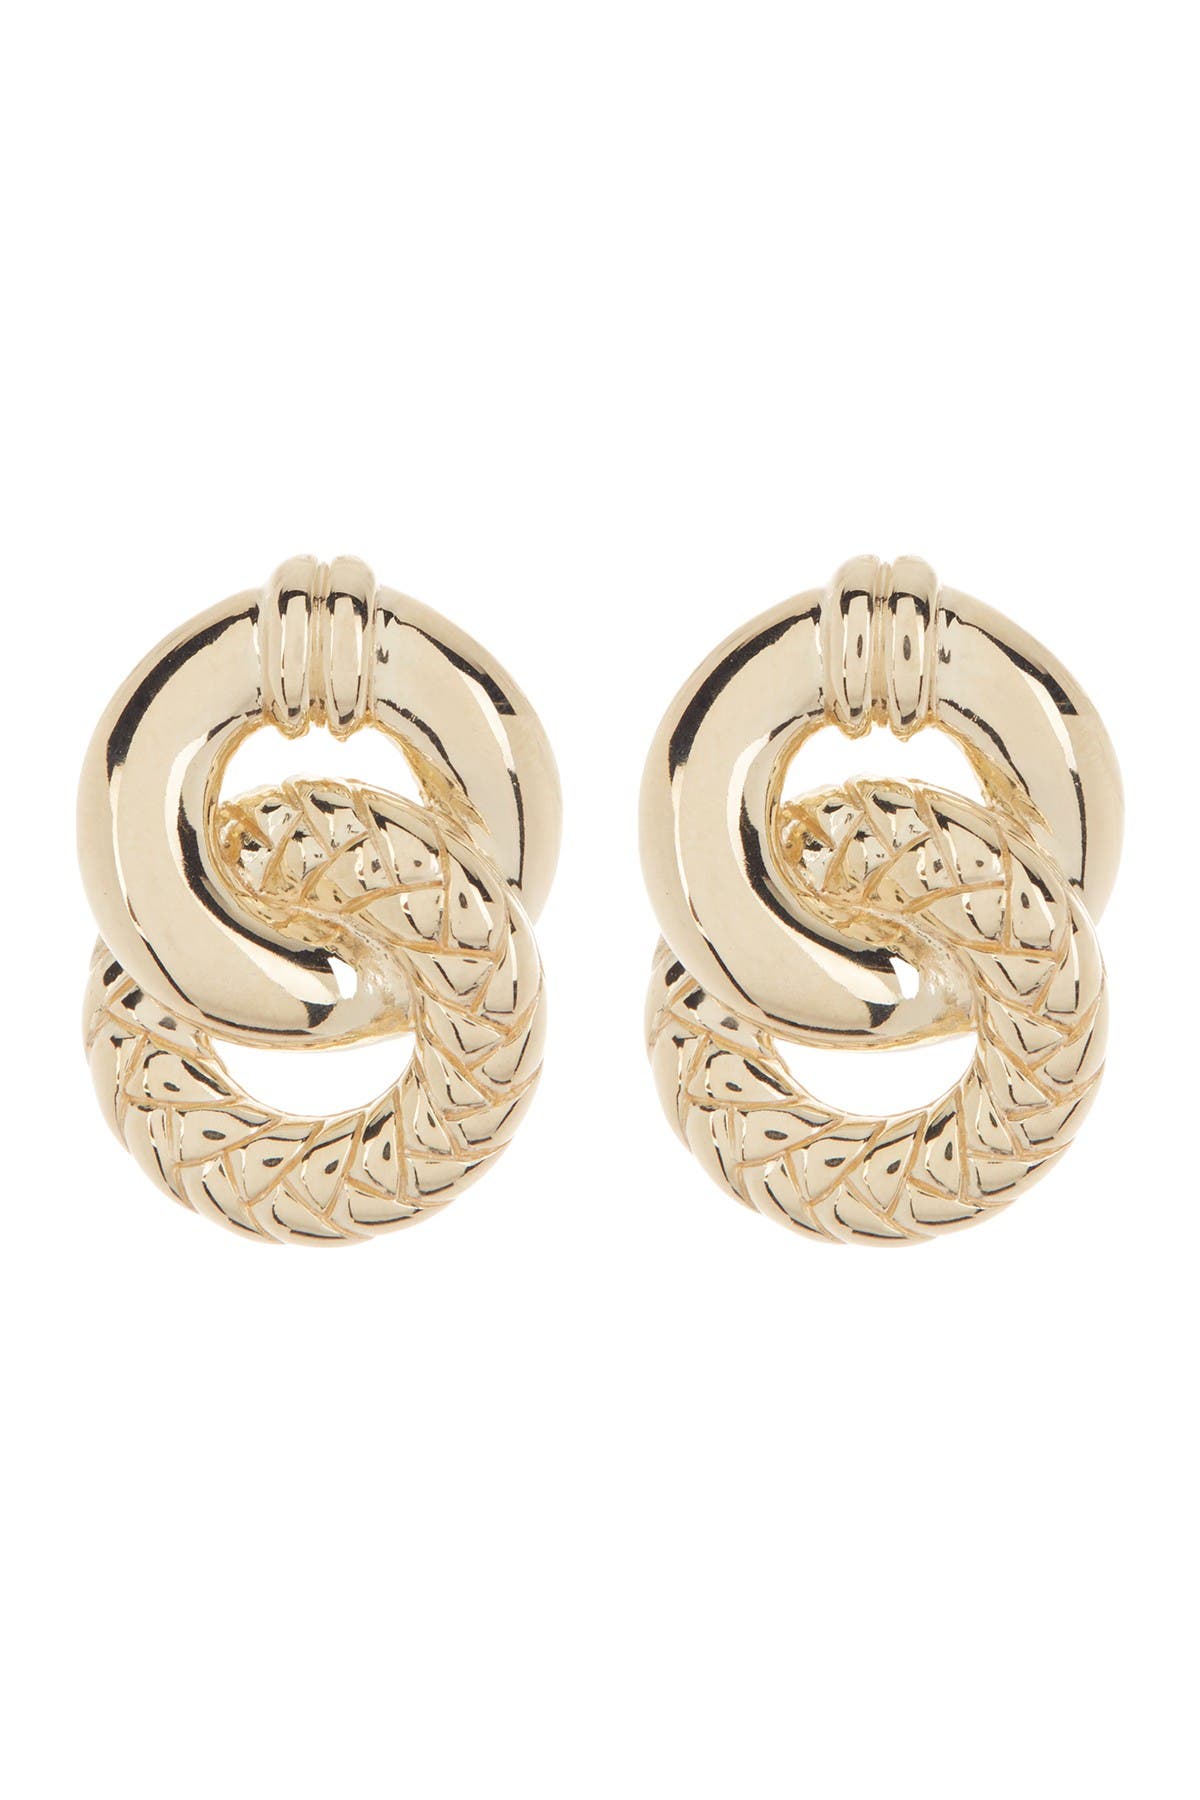 Judith Ripka 14k Gold Clad Double Circle Stud Earrings In Colorless